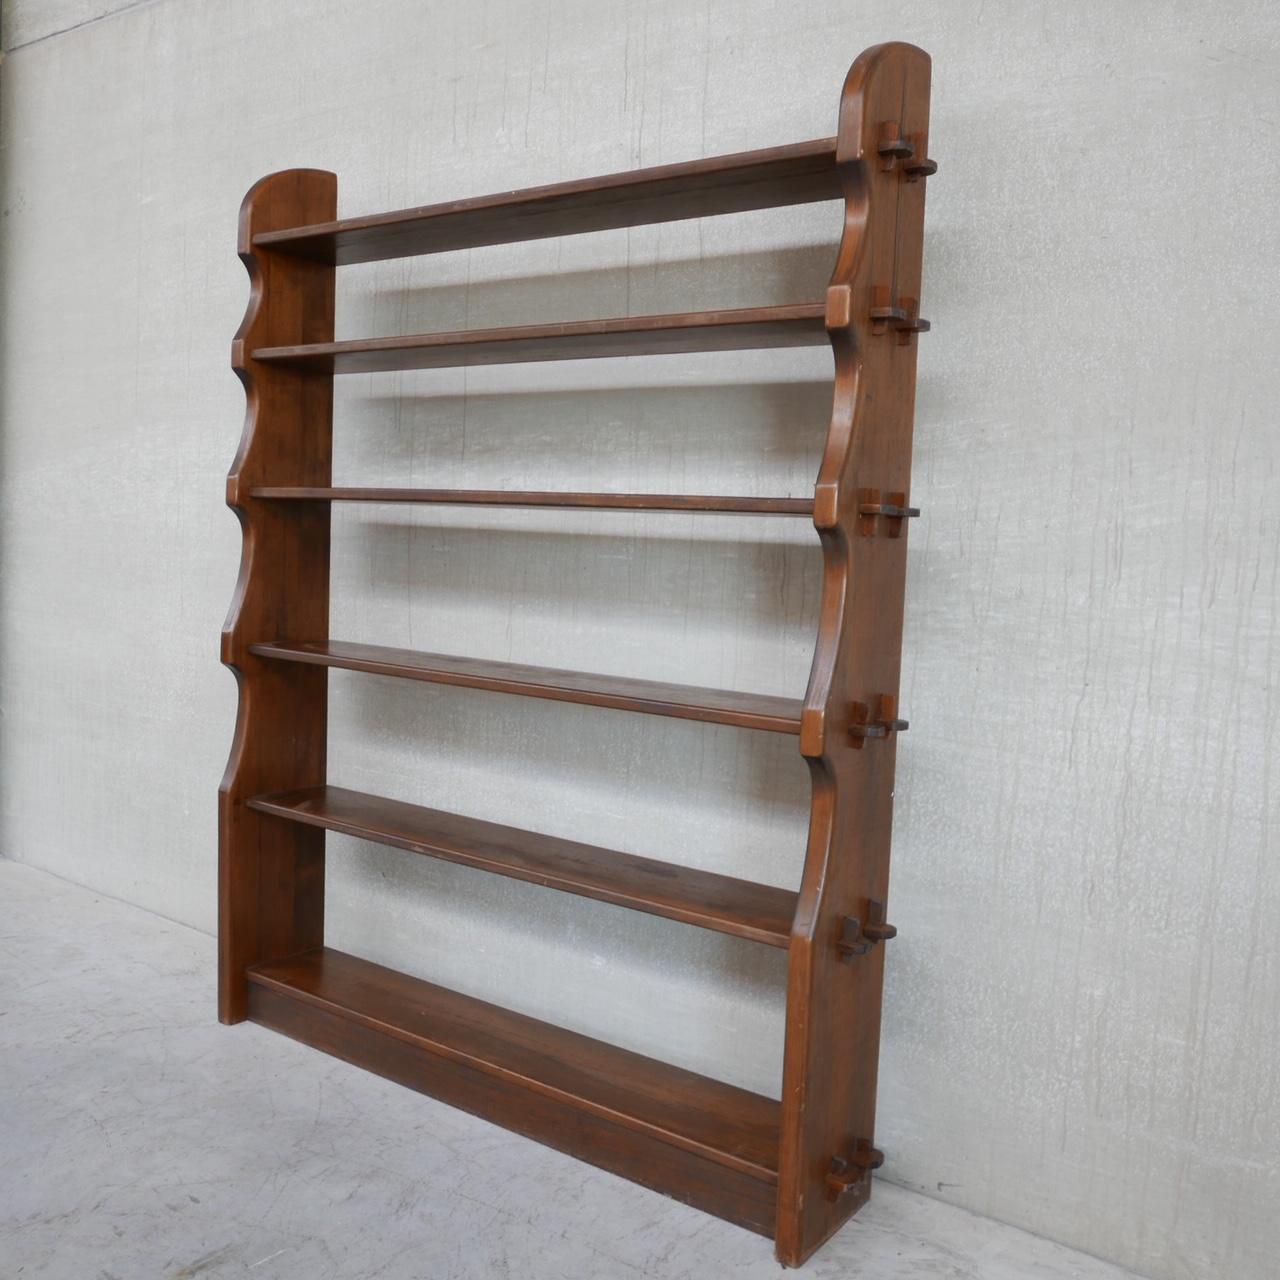 A large open bookcase. 

Finland, c1960s. 

Attributed to Olavi Hänninen for Mikko Nupponen.

Brutalist style with exposed peg joints. 

Some wear commensurate with age (see photos) but generally good condition. 

Location: Belgium